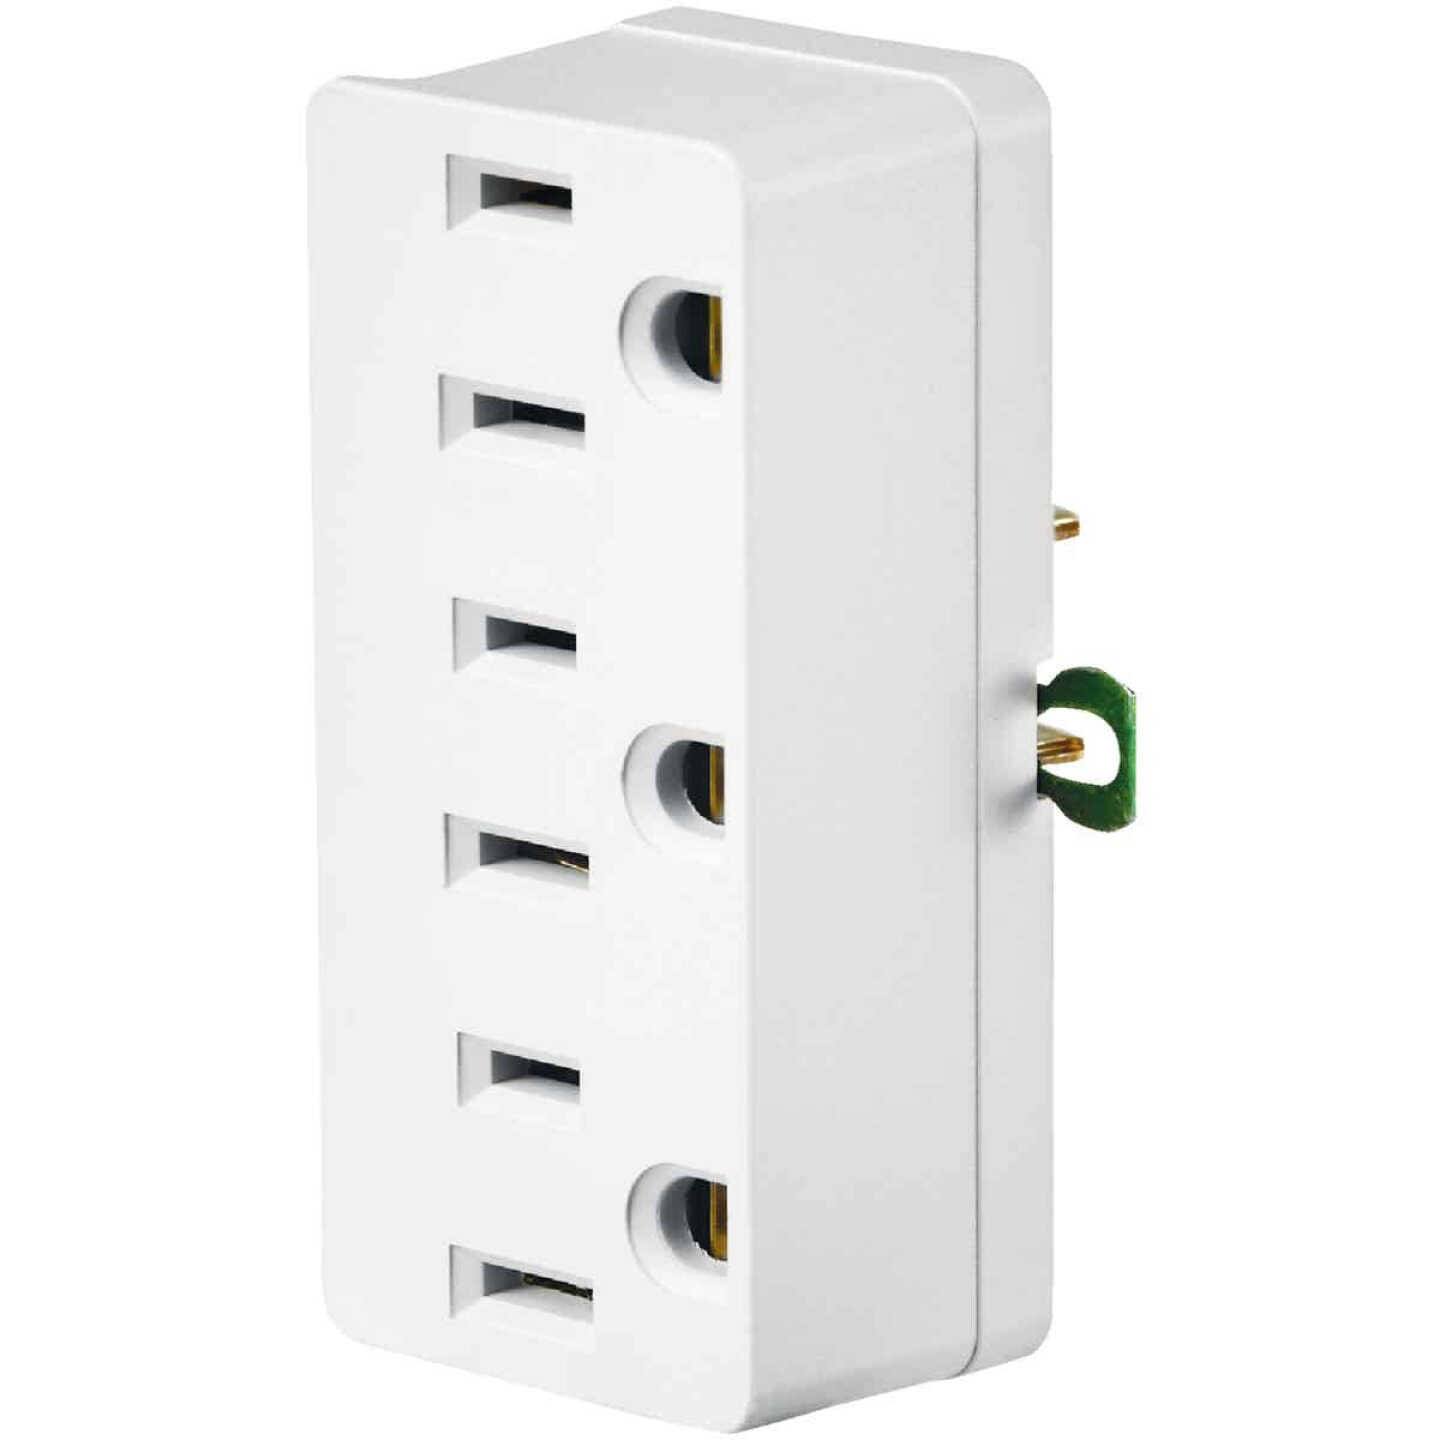 Leviton 002-698-W White Triple Tap Plug-in Outlet Adapter